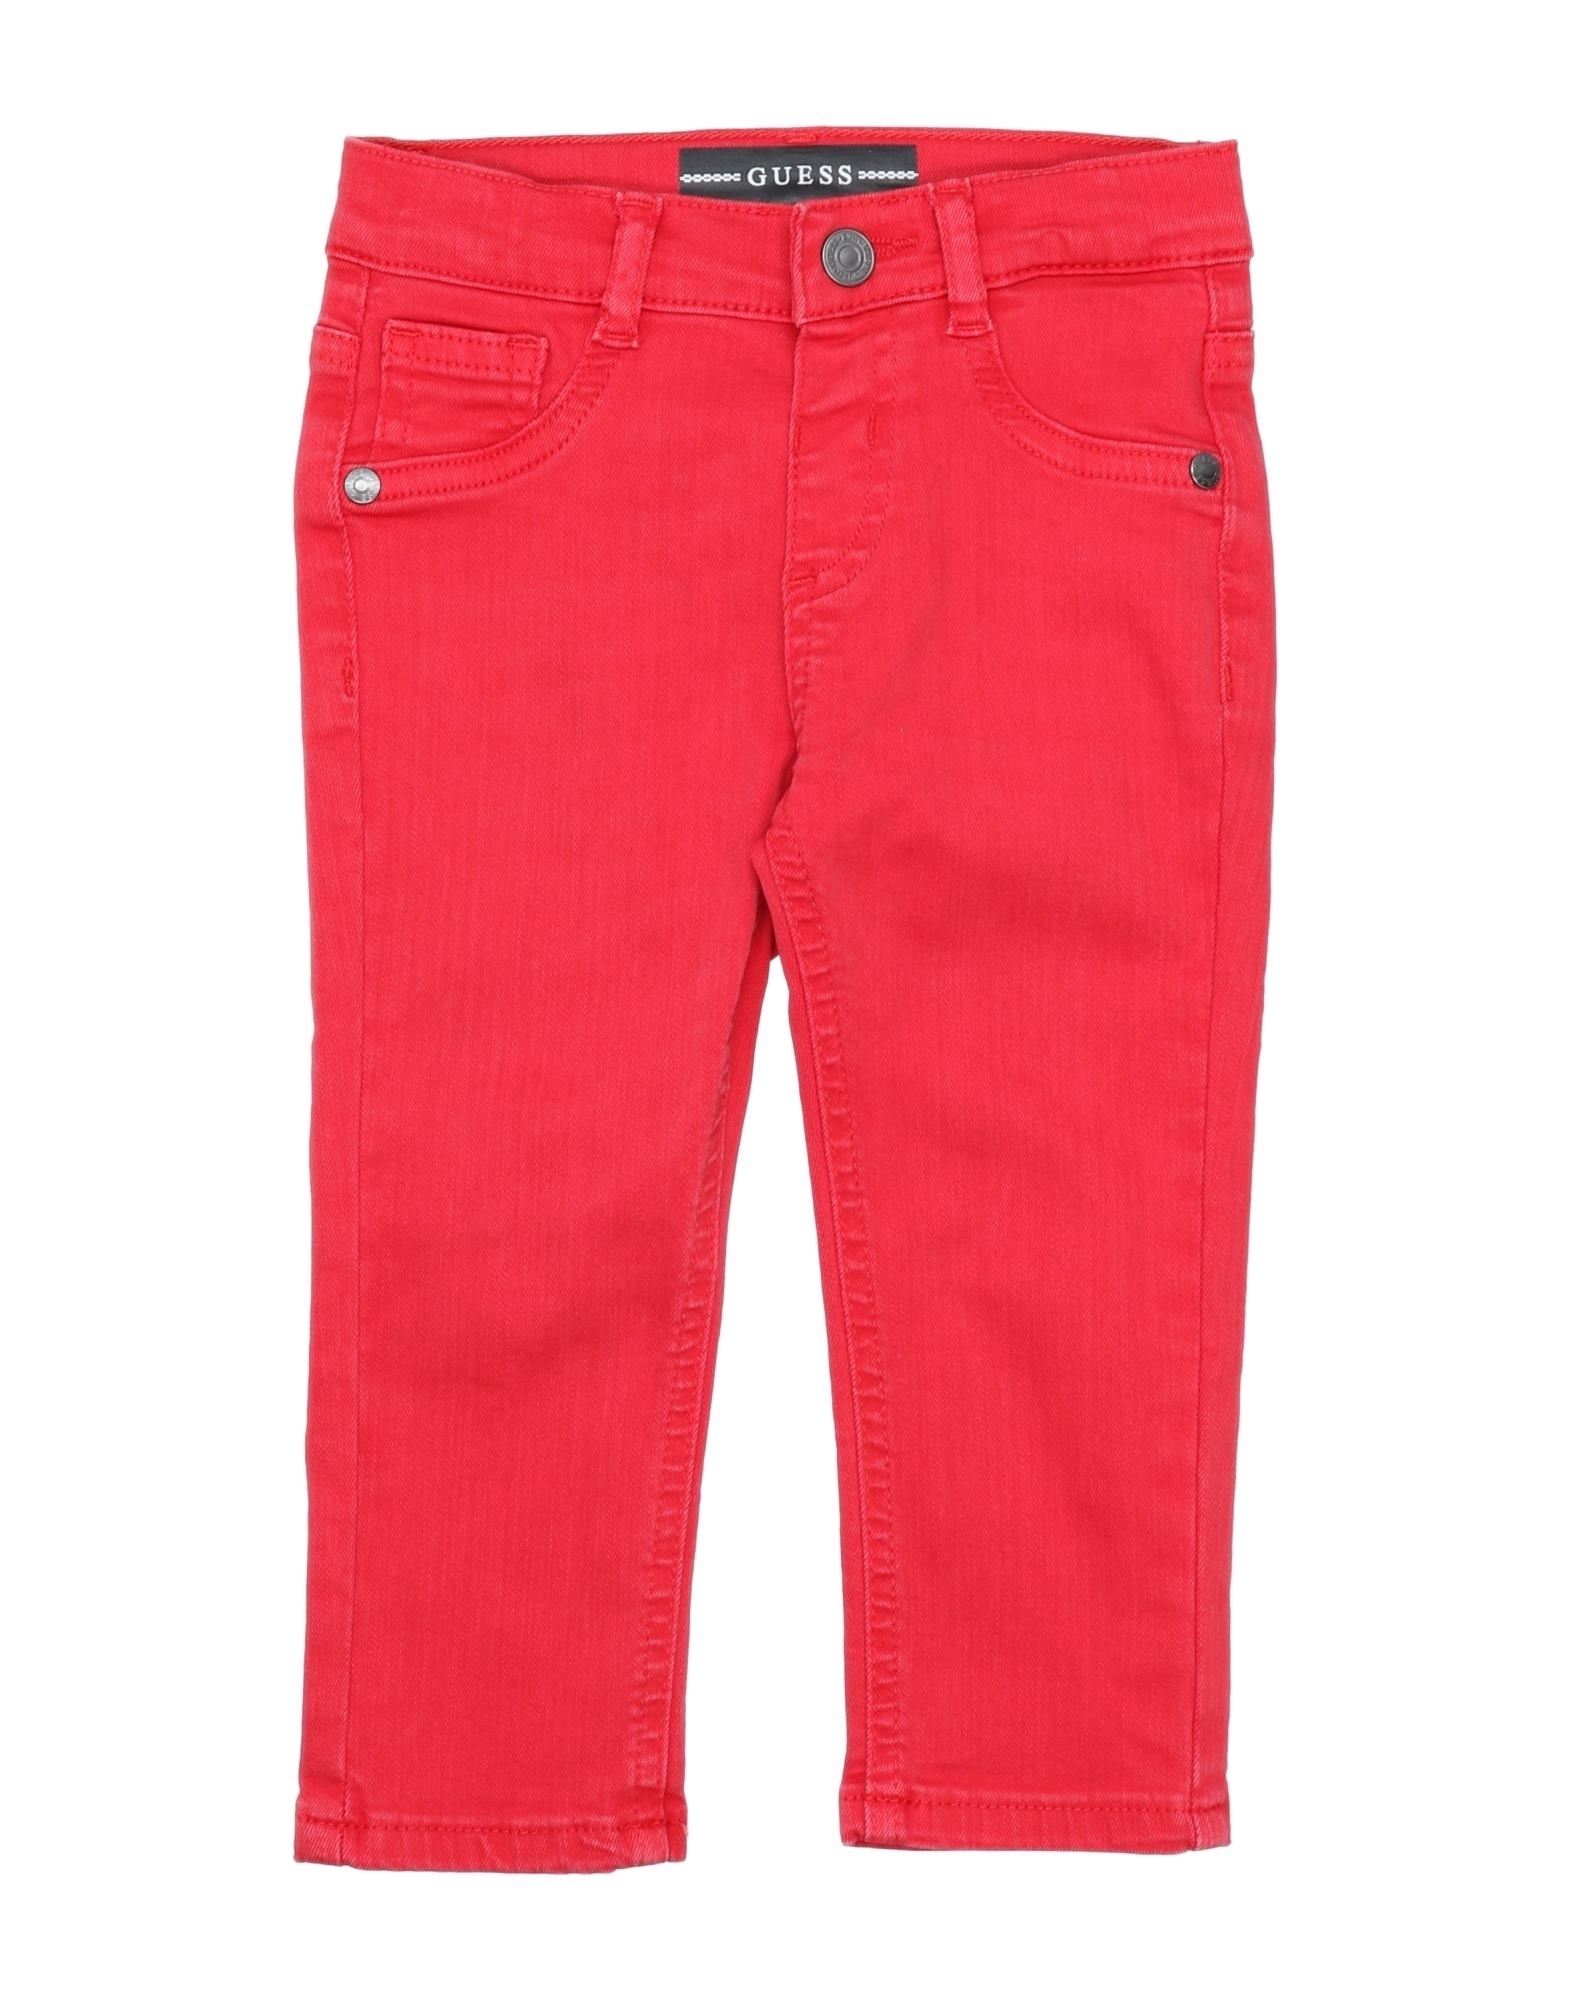 GUESS Jeanshose Kinder Rot von GUESS